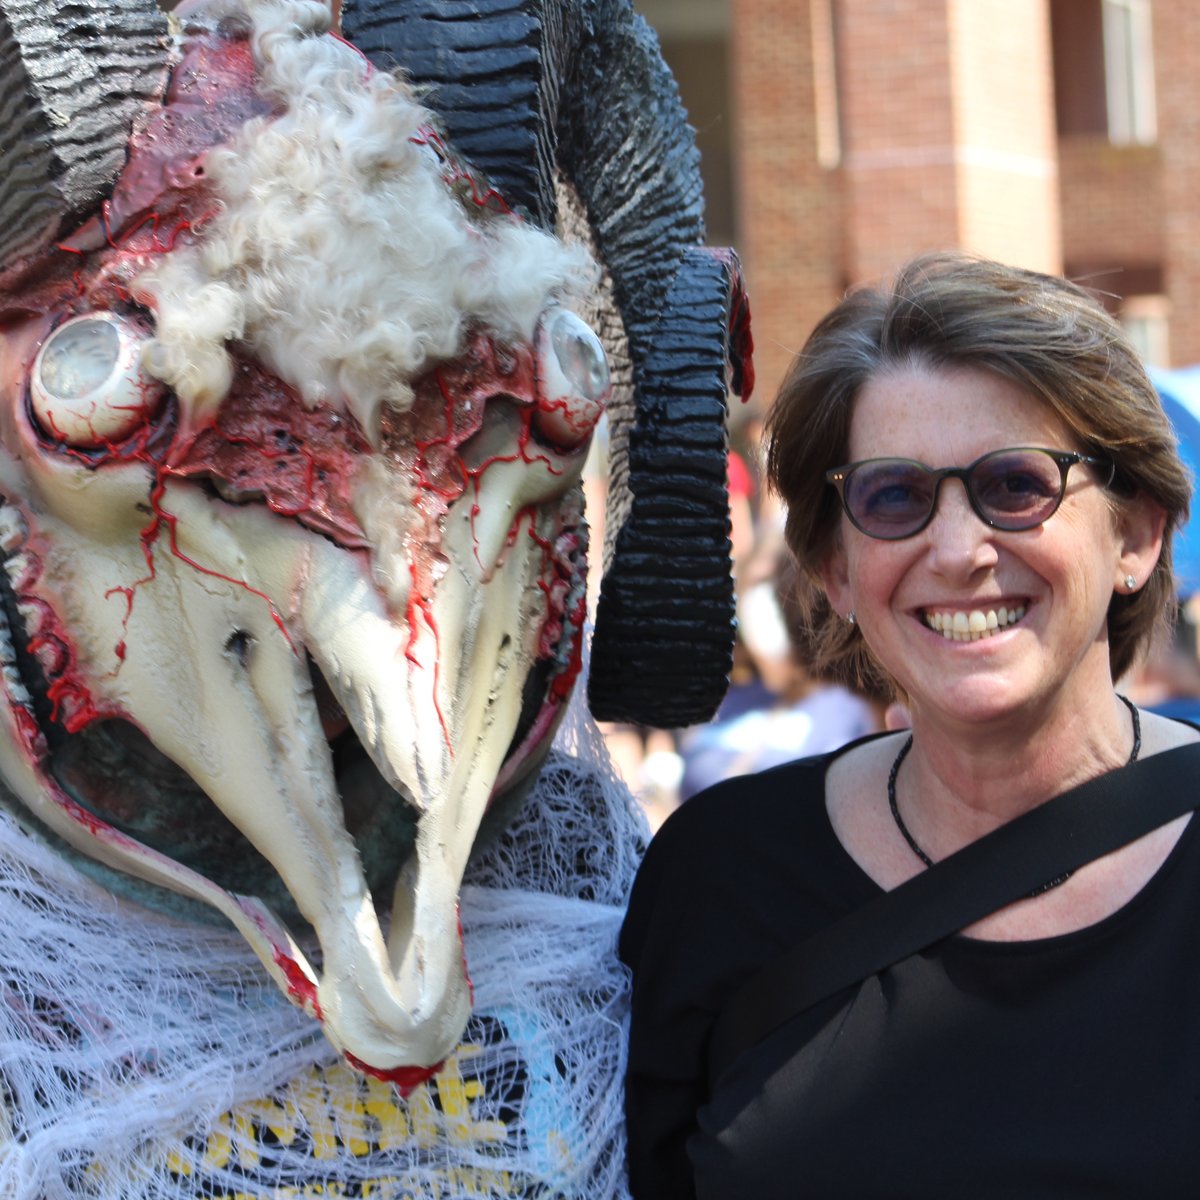 test Twitter Media - Ever seen Zombie Rameses? (You're NOT ready.) Our new @UNCSPHdean, Dr. Nancy Messonnier, braved the UNC Zombie Preparedness event today to spread the word about our Gillings on the Ground training program. After all, "If you're ready for zombies, you're ready for anything." 🧟‍♂️ 🐏 https://t.co/obH7JI3sdh